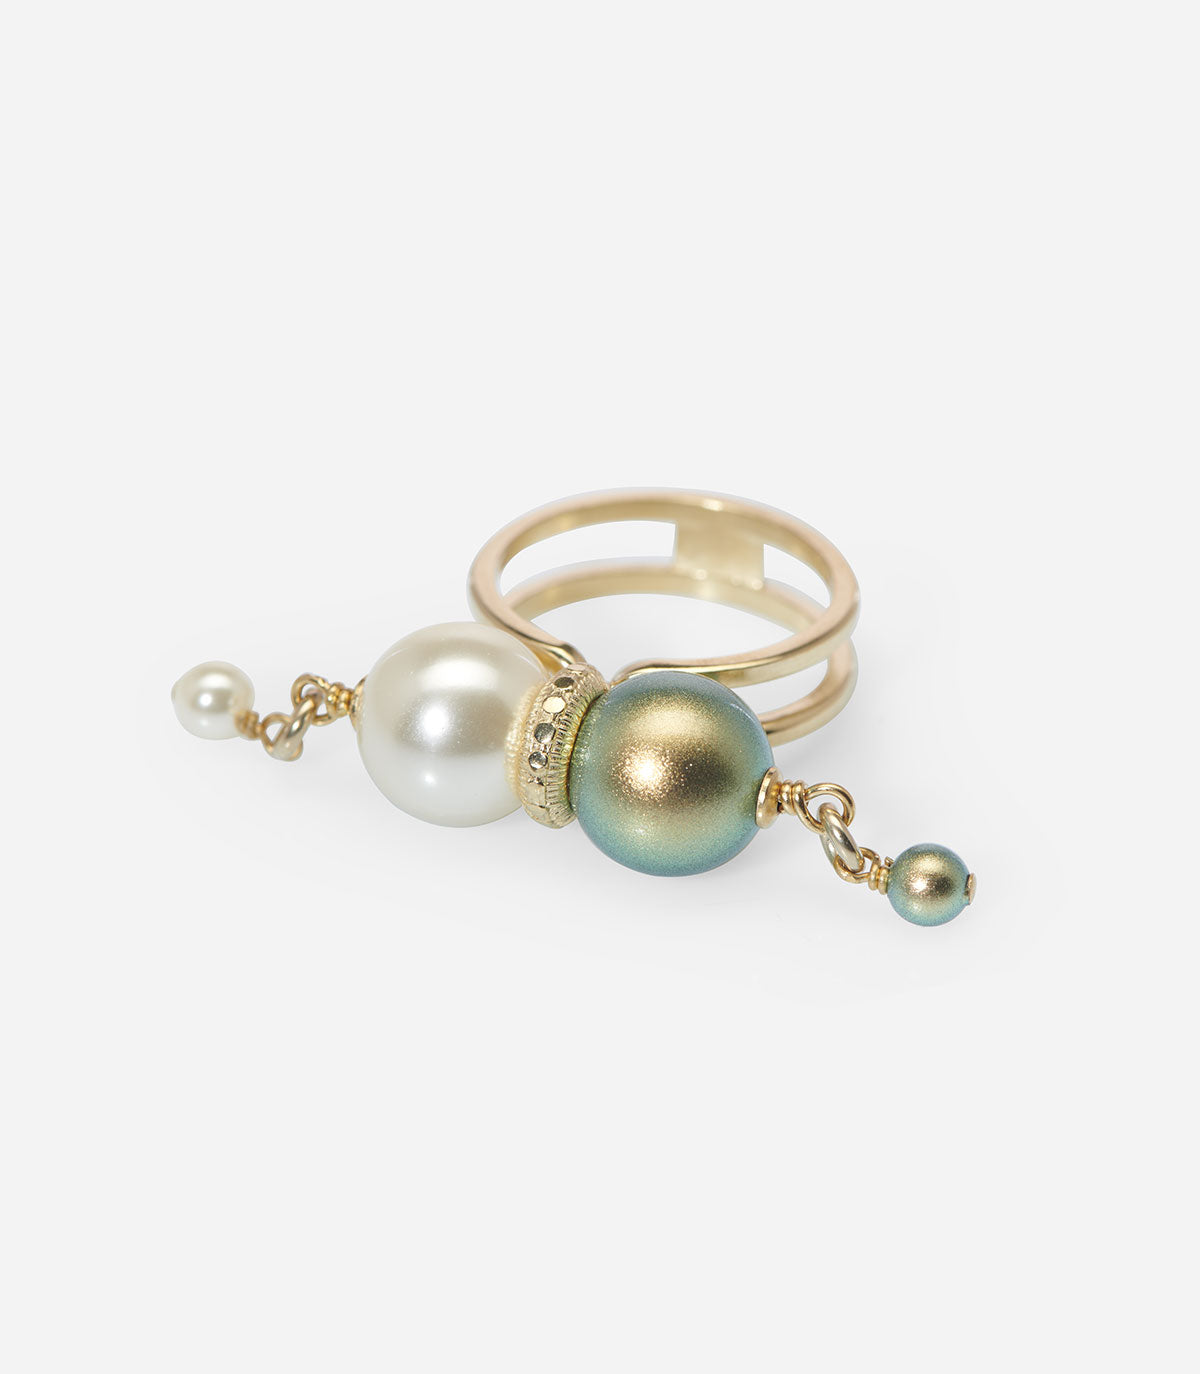 SHEEANA PEARLS RING - Bague - Delphine-Charlotte Parmentier